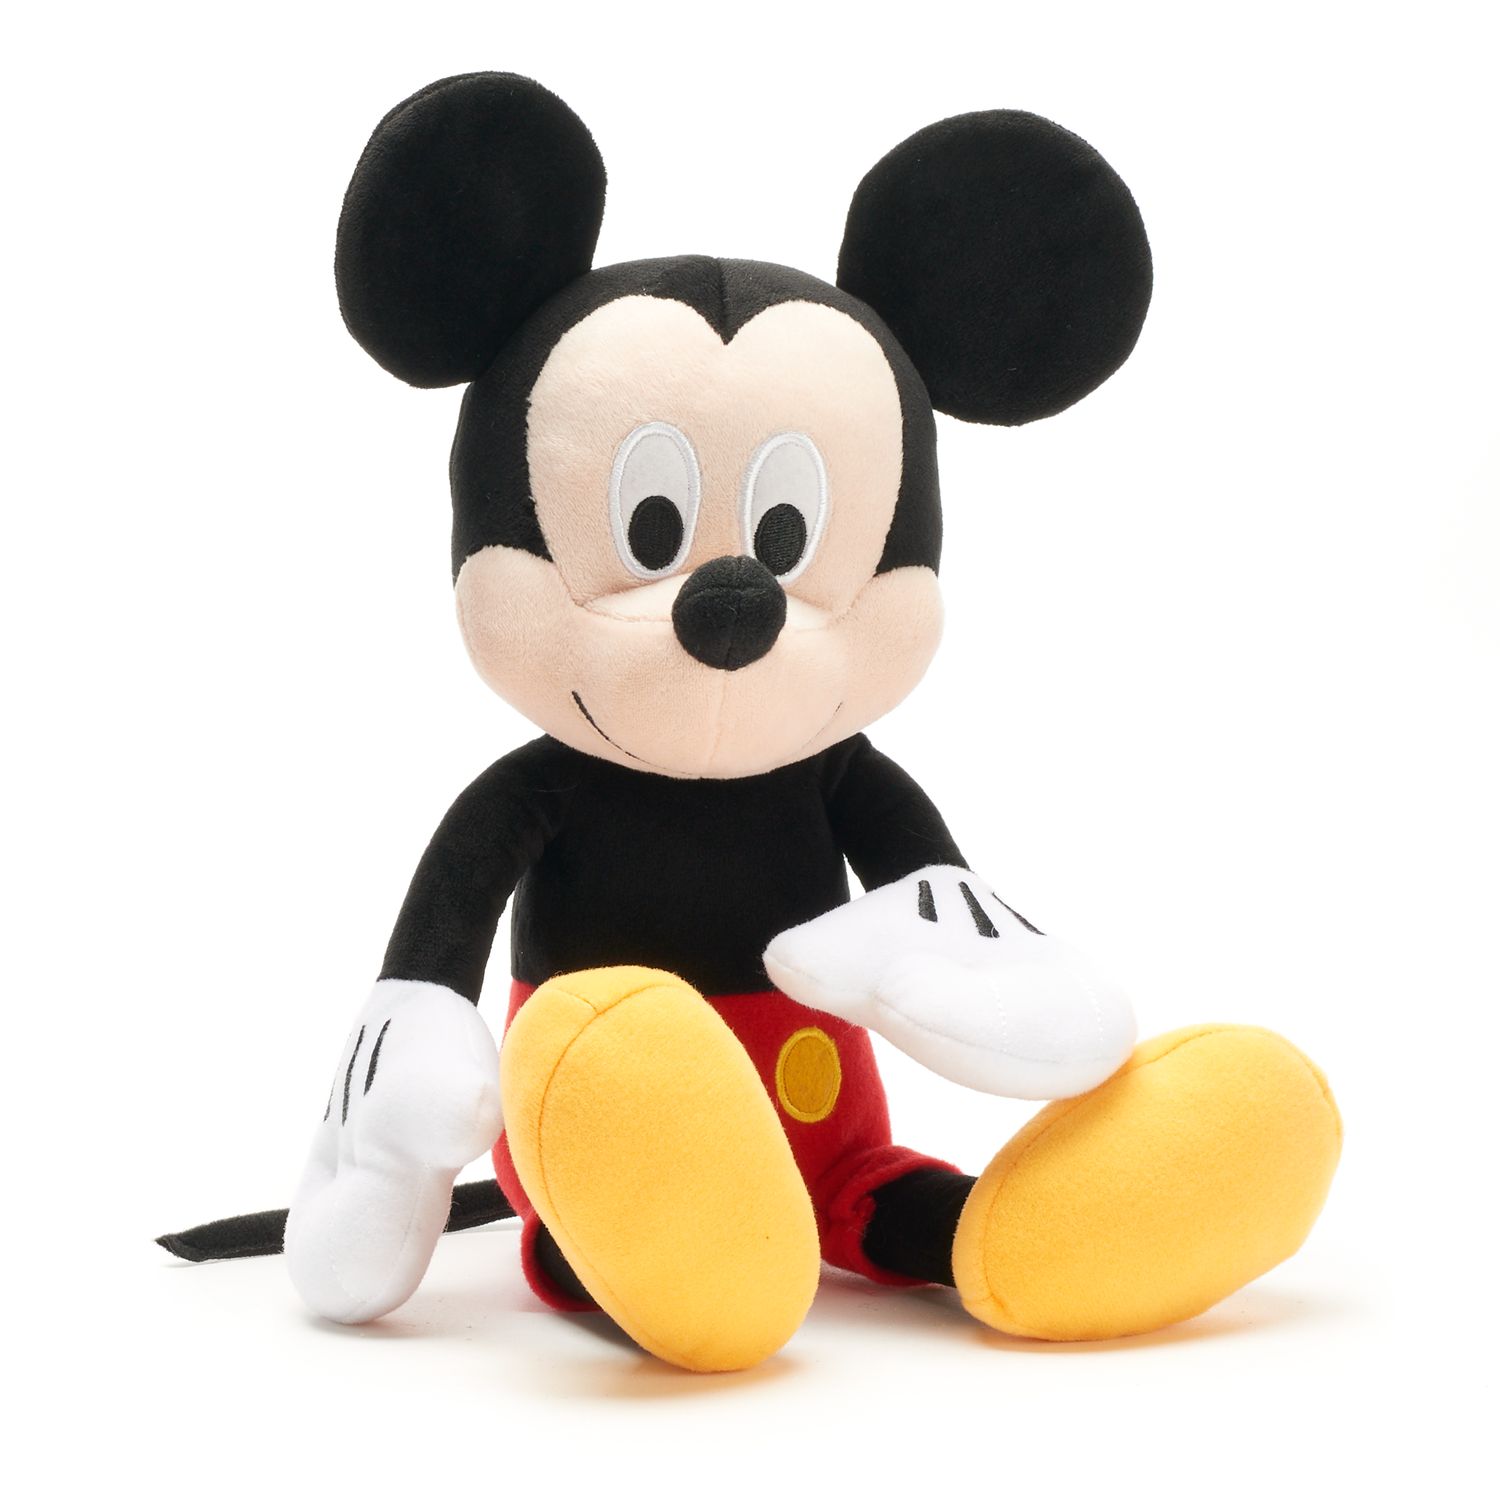 Disney's Mickey Mouse Plush by Kohl's Cares